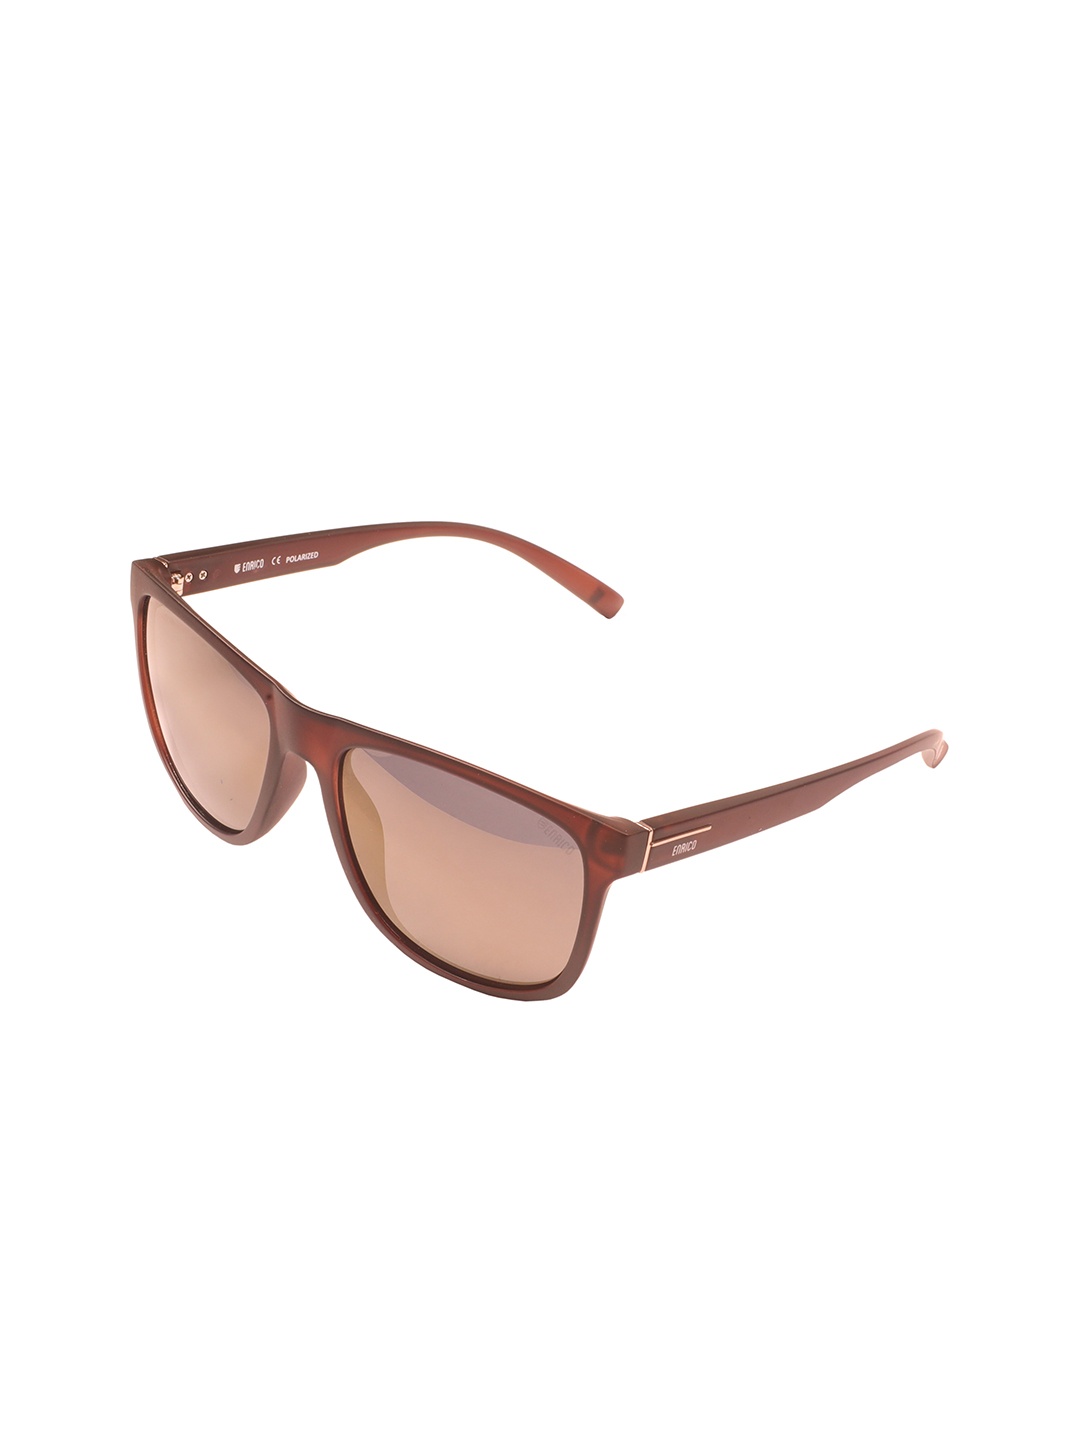 

ENRICO Unisex Square Sunglasses with UV Protected Lens, Brown